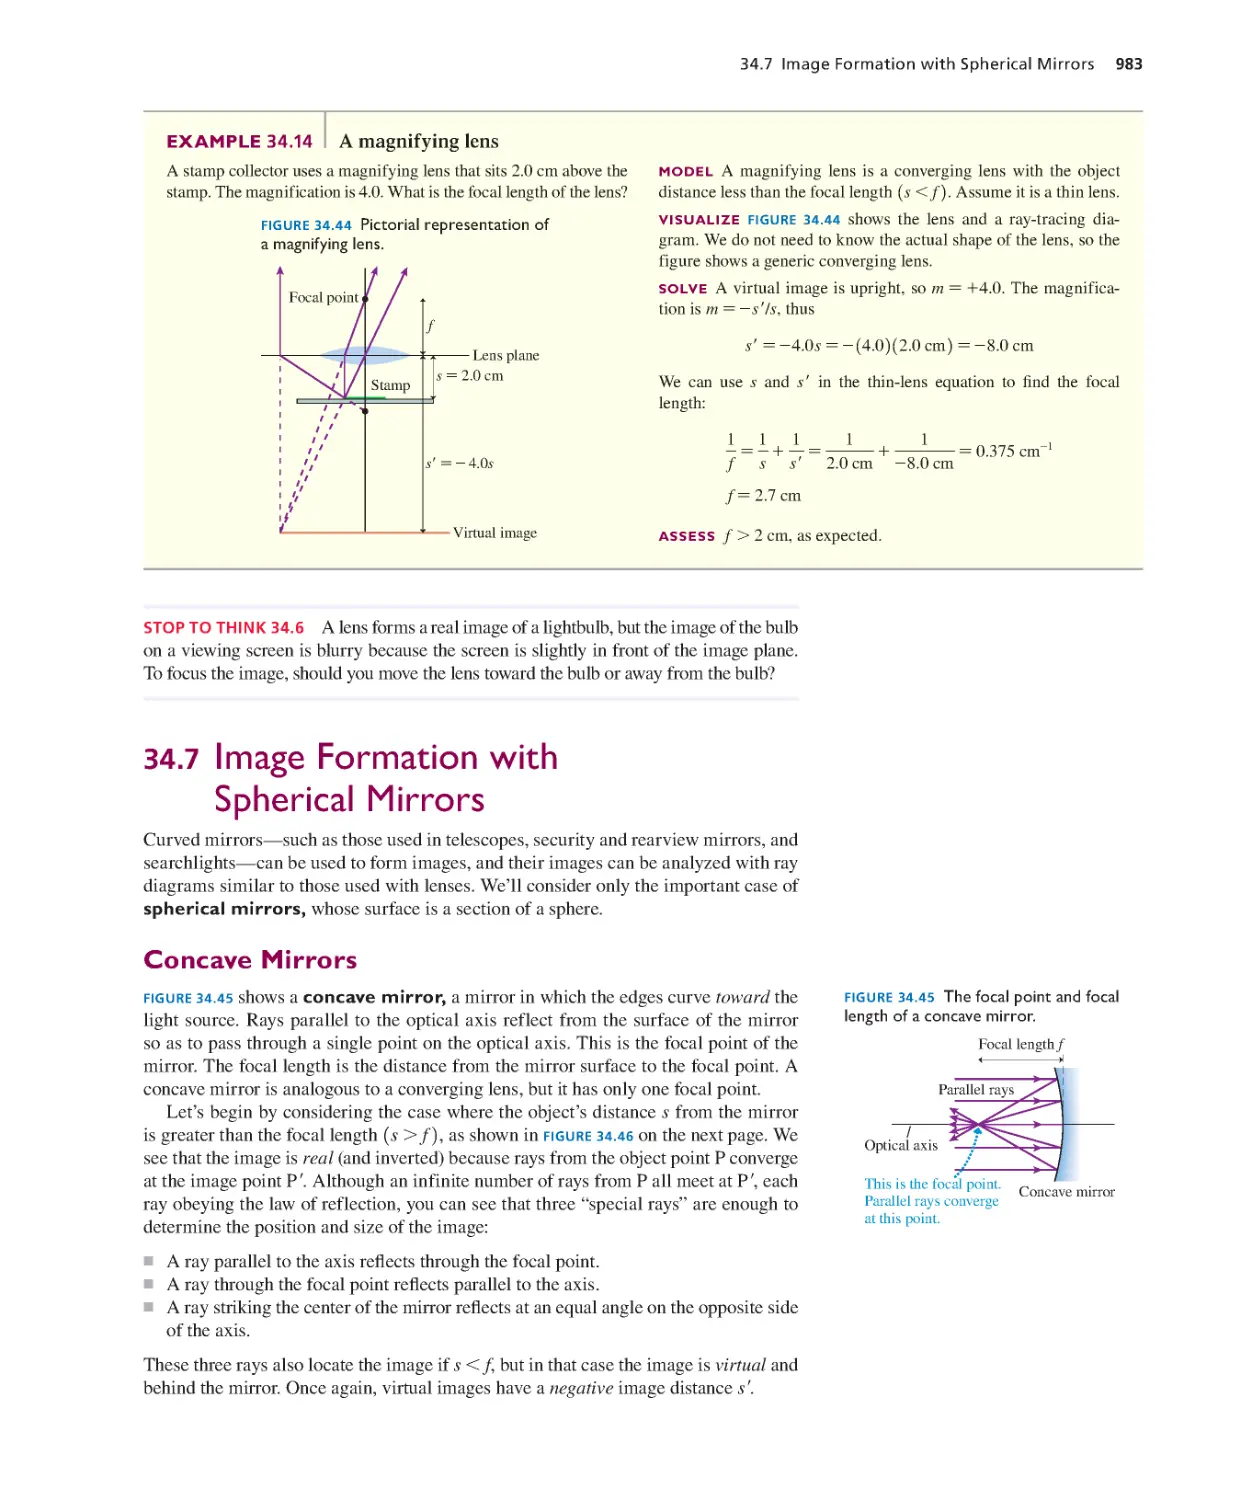 34.7. Image Formation with Spherical Mirrors